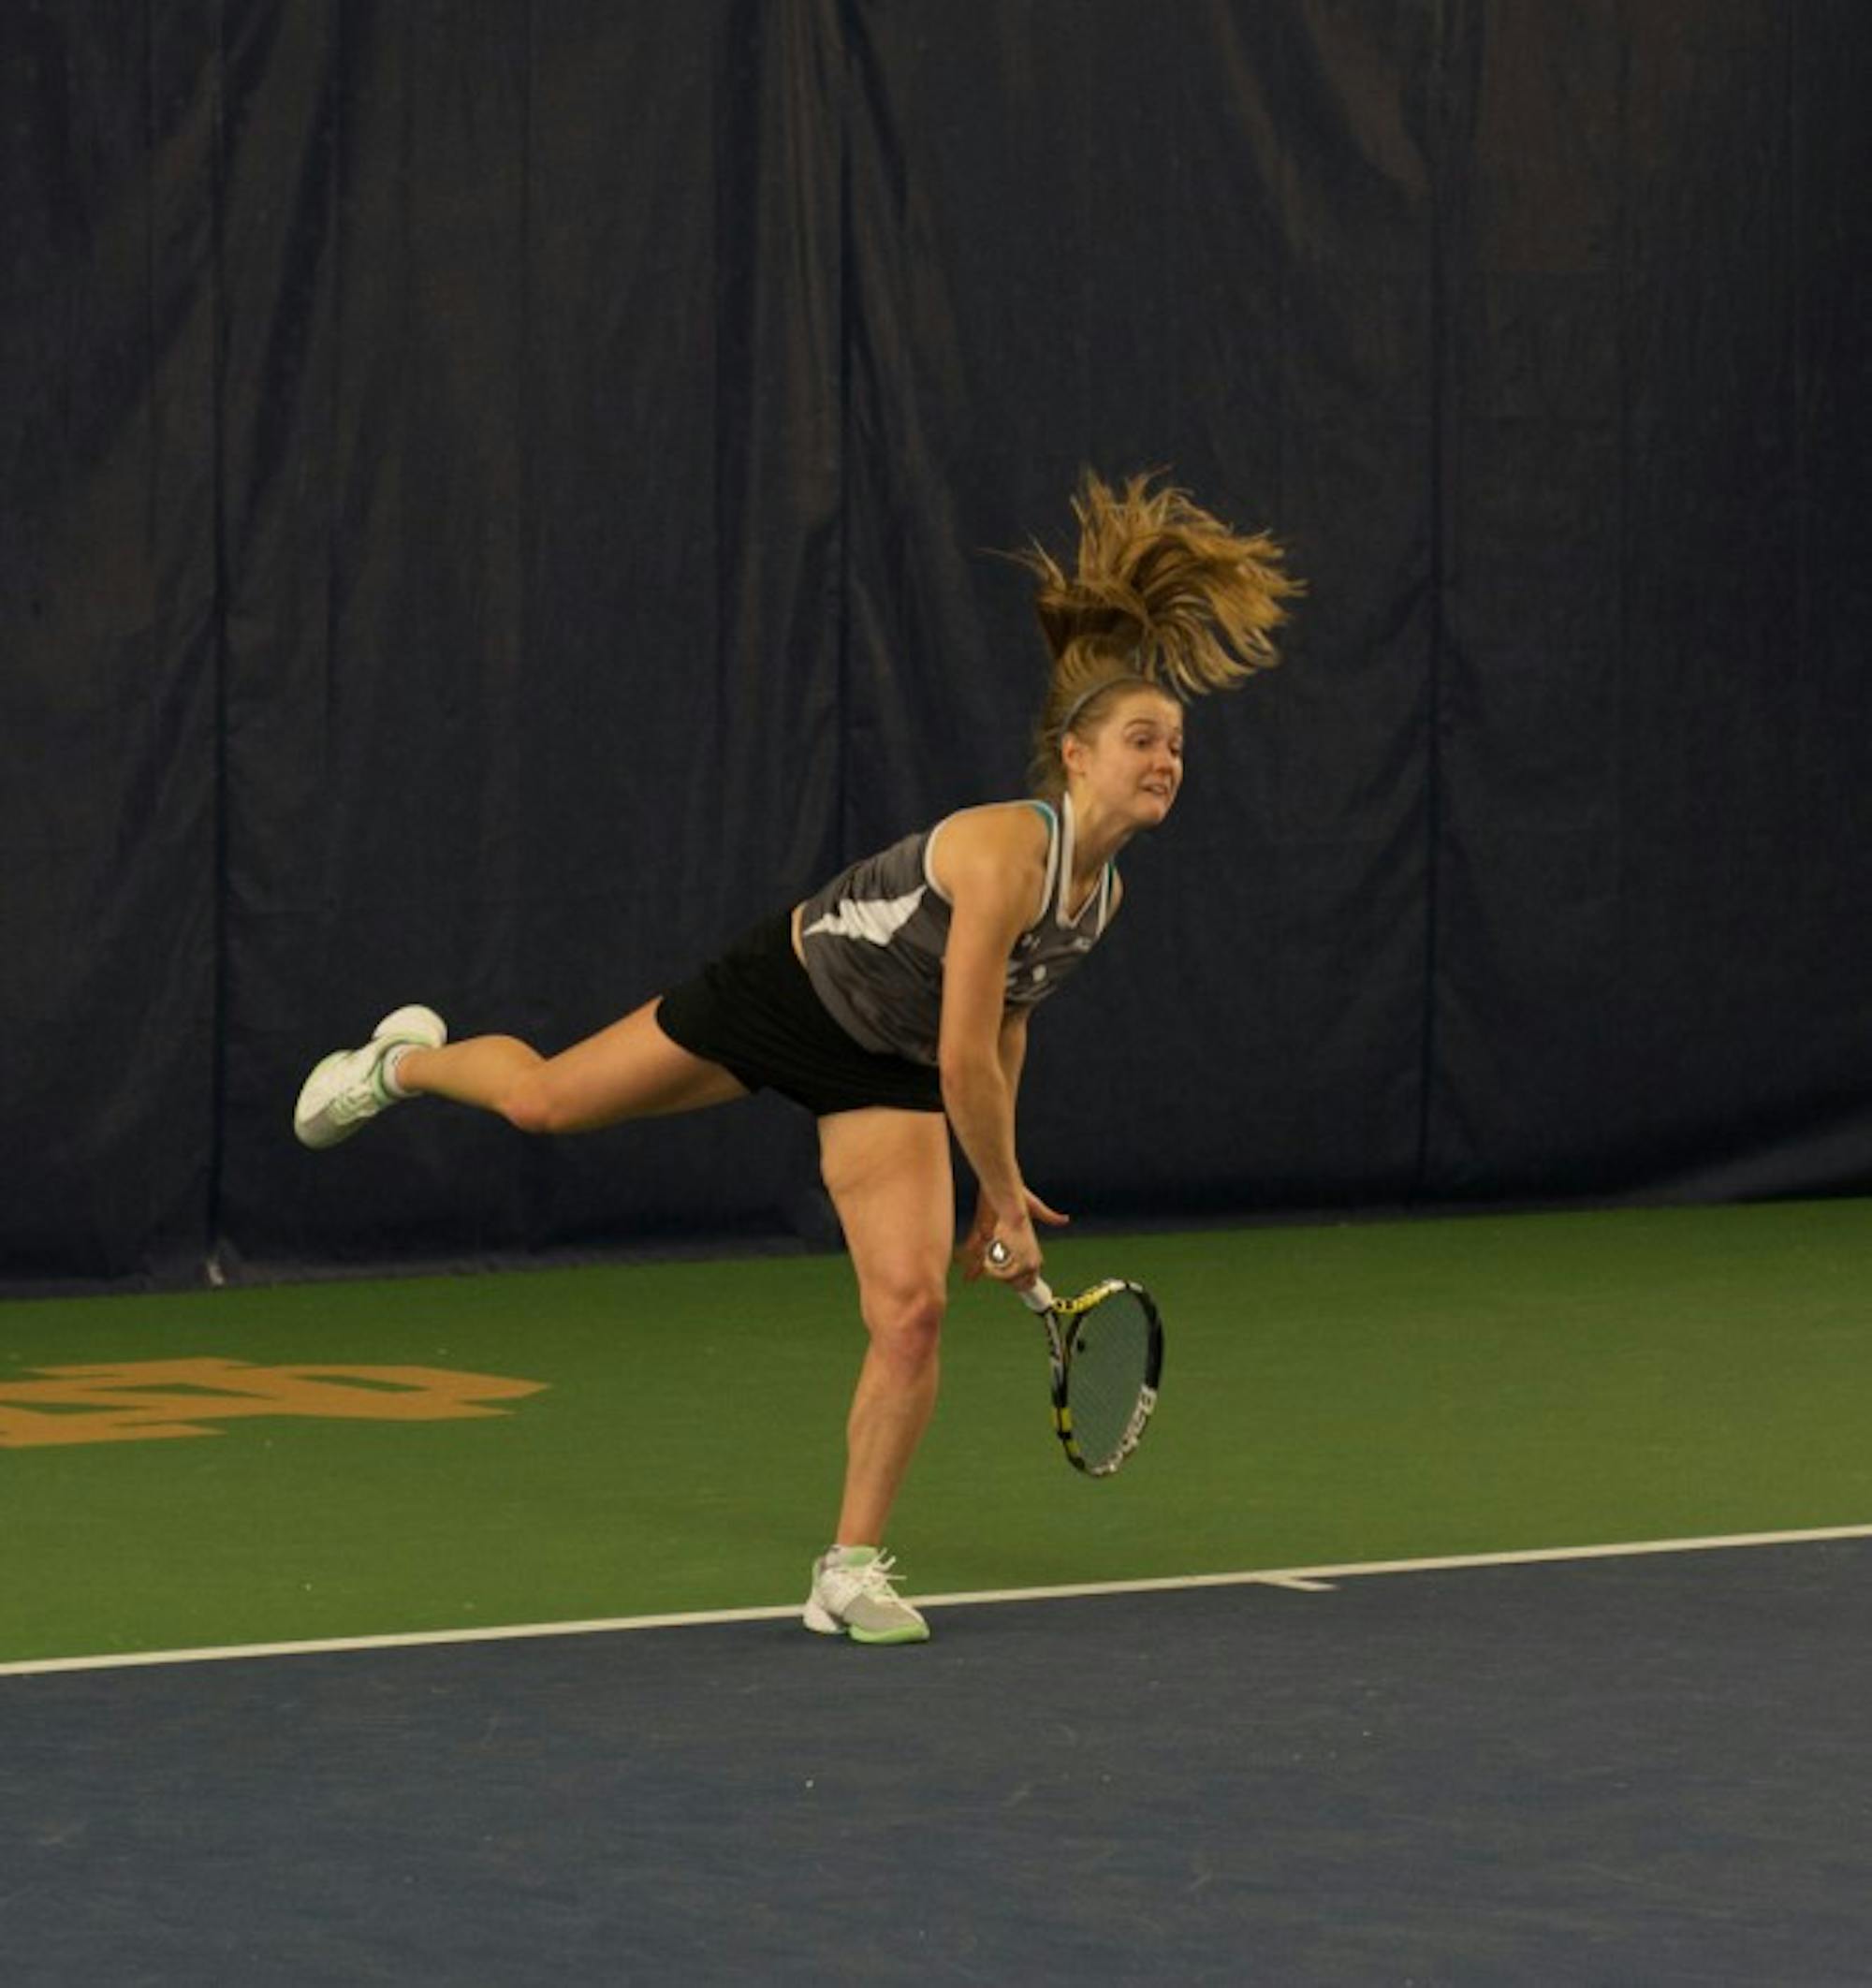 Irish senior Monica Robinson follows through on a serve during Notre Dame’s 6-1 victory over Indiana on Feb. 20 at Eck Tennis Pavilion.